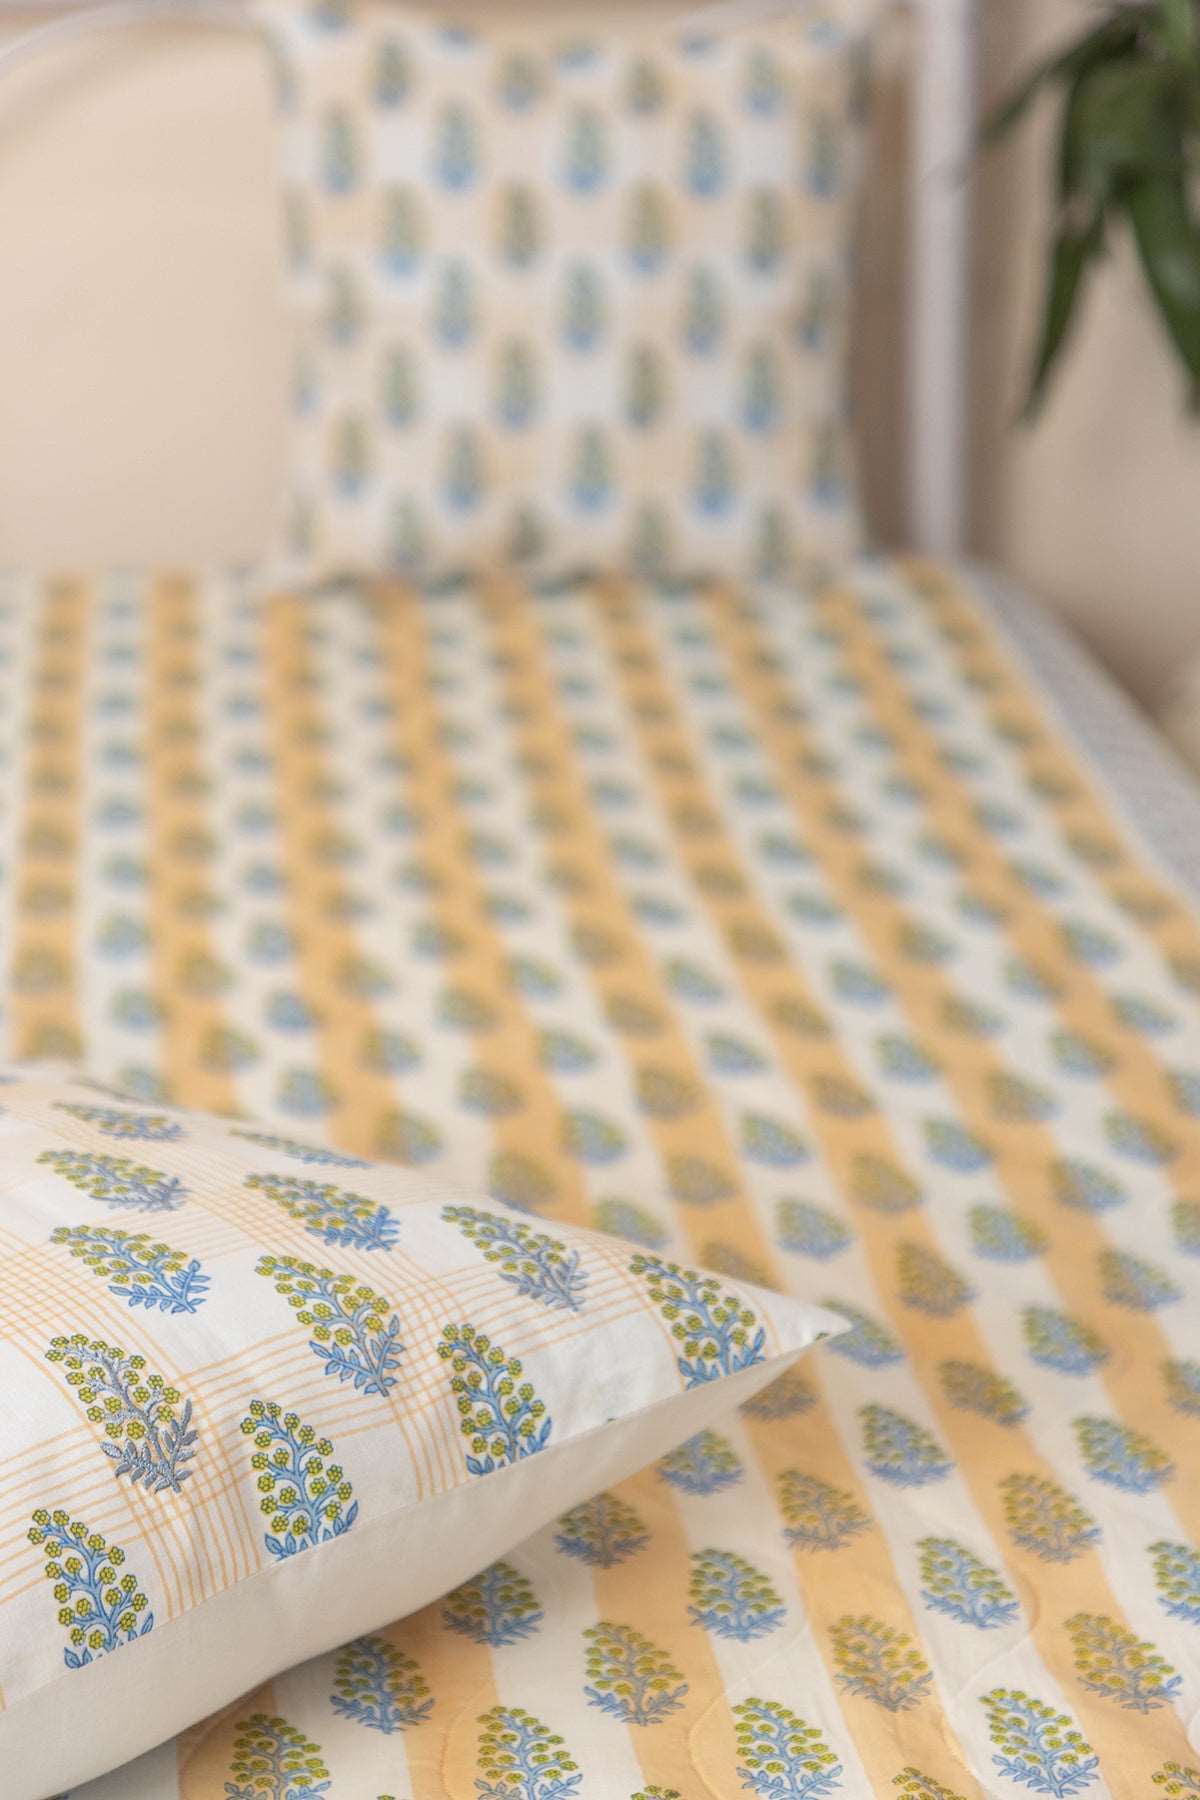 Dewy Florets Quilted Bedcover